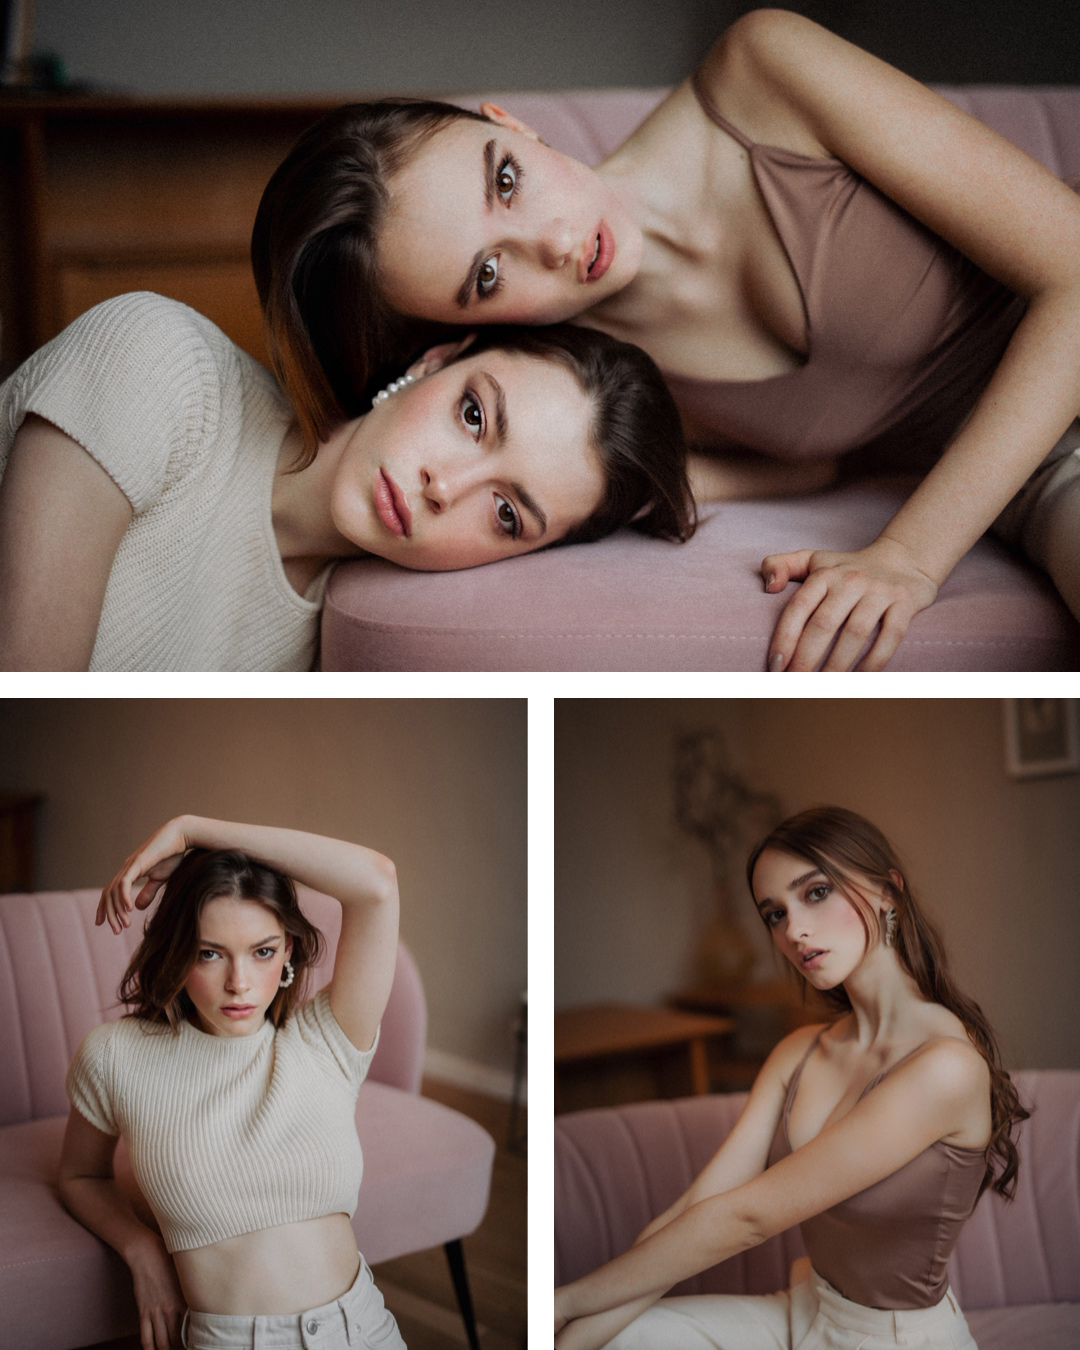 Beautyeditorial – Photography: Nora Scholz Models: Emy Maja Rose / Leti Moin Location: Atelier Uta Stabler Make-up Artist / Hairstyling: Uta Stabler